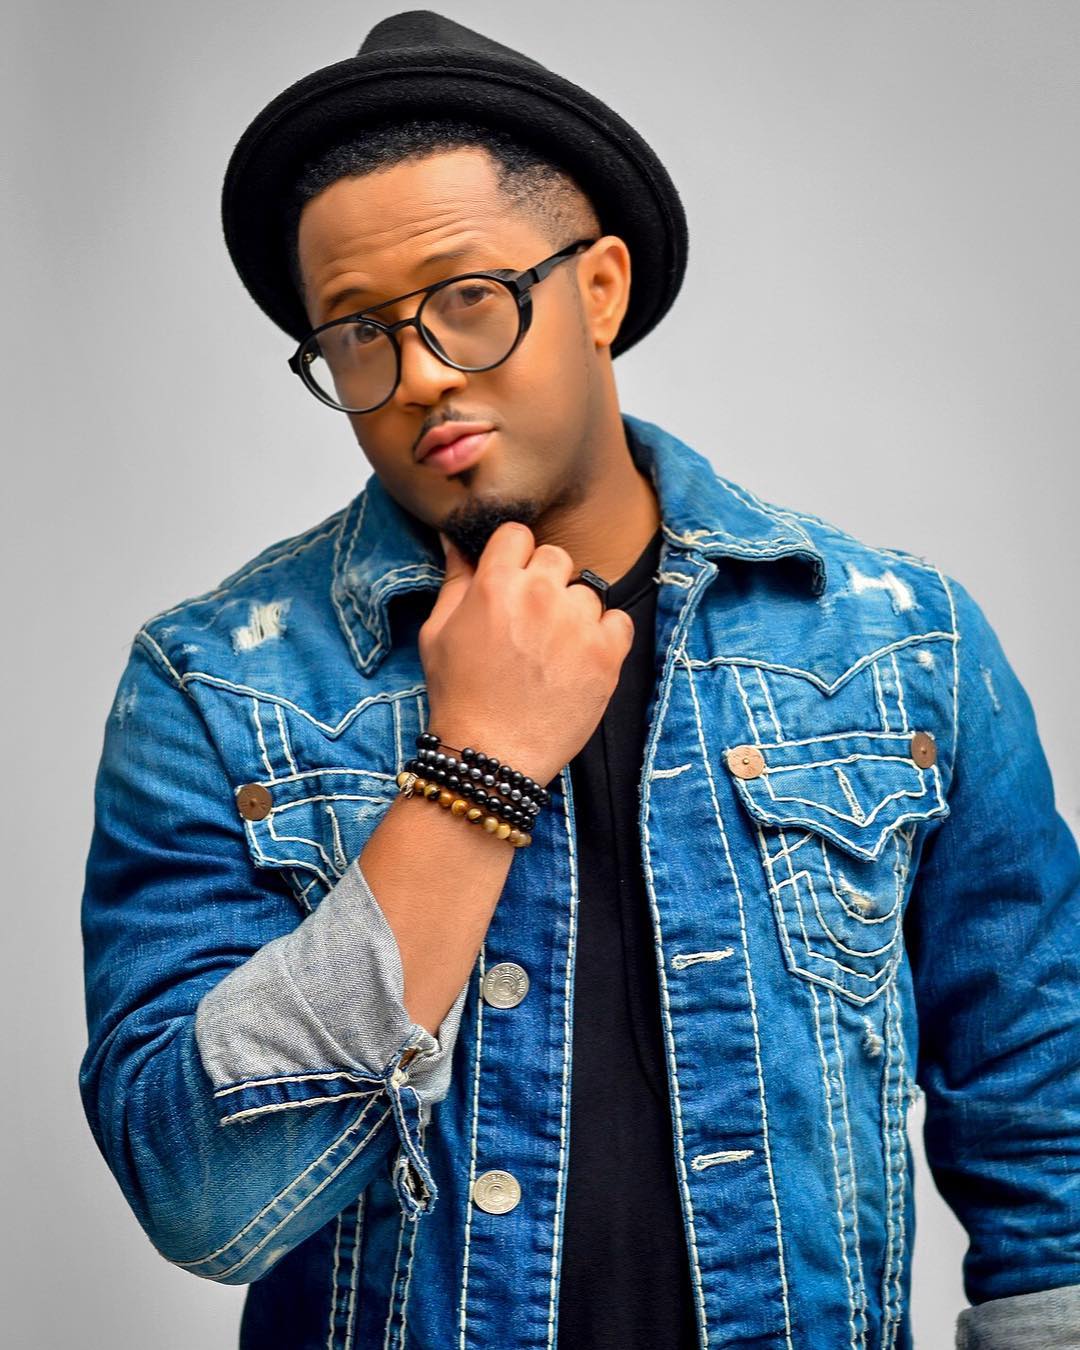 Mike Ezuruonye shows his swag in his outfit